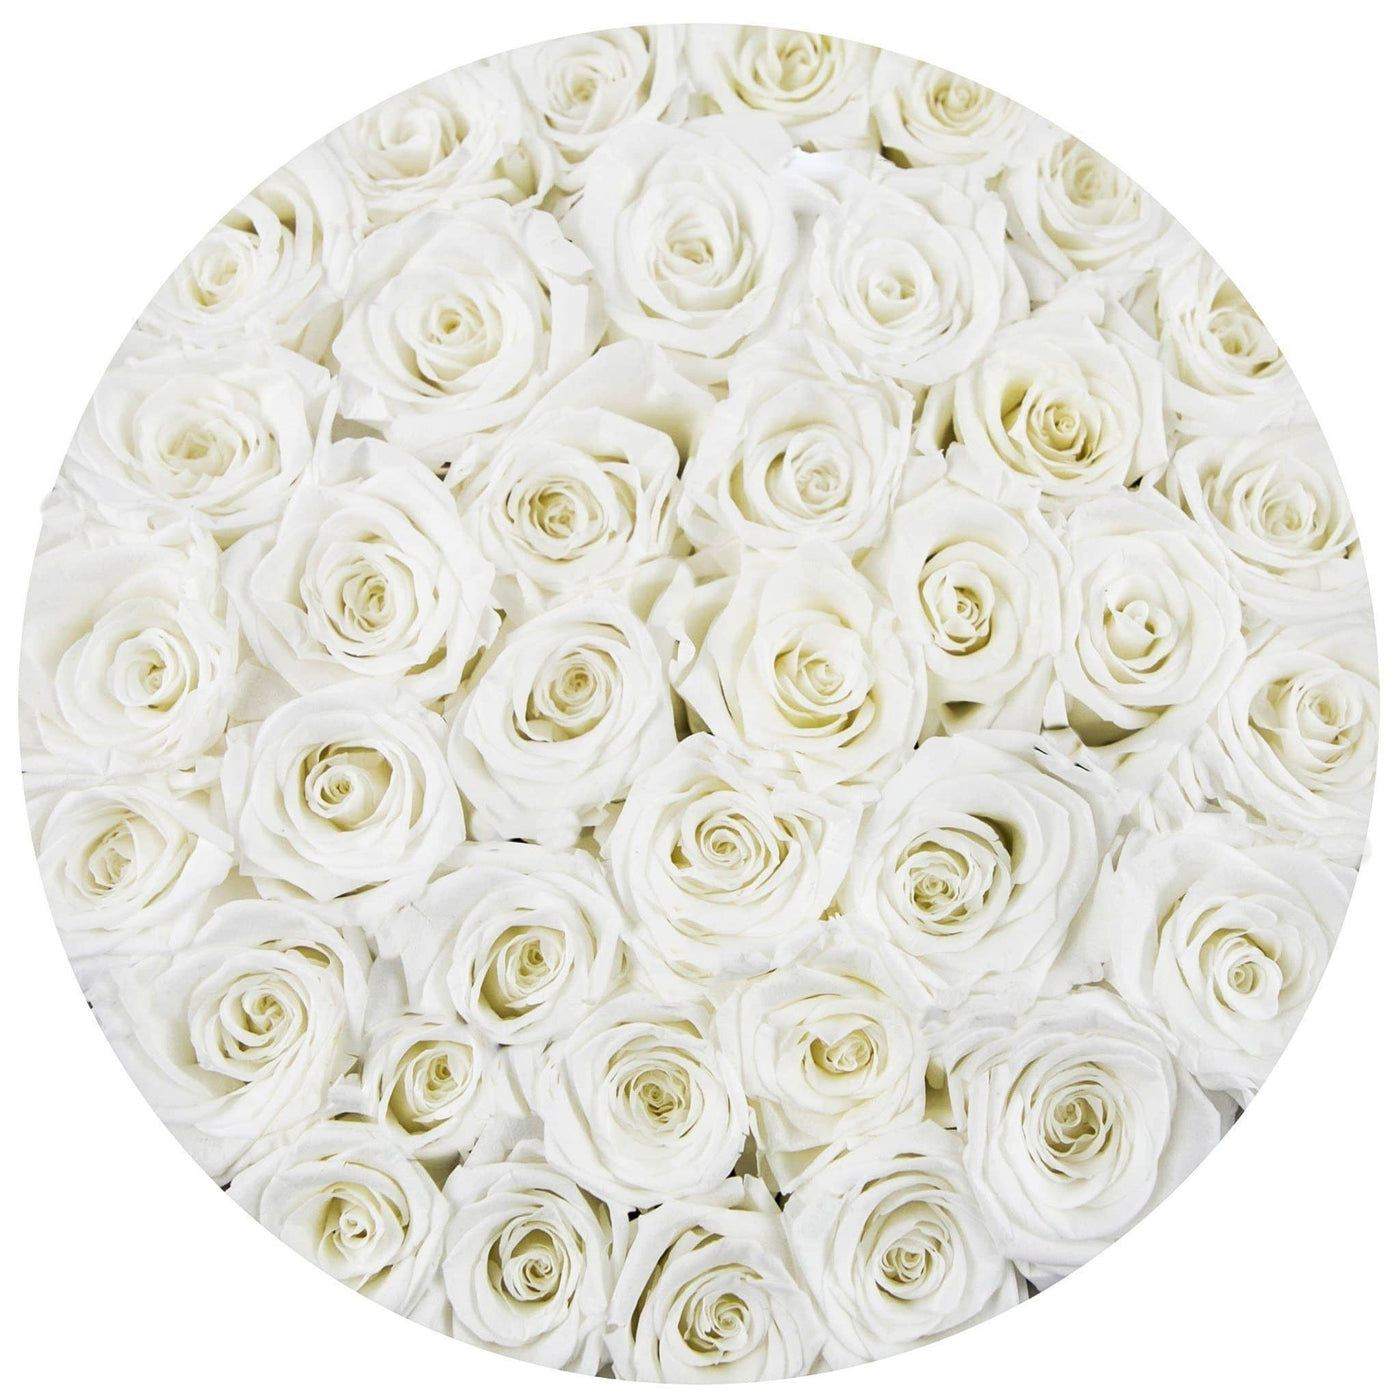 White Roses That Last A Year - Grande Rose Box